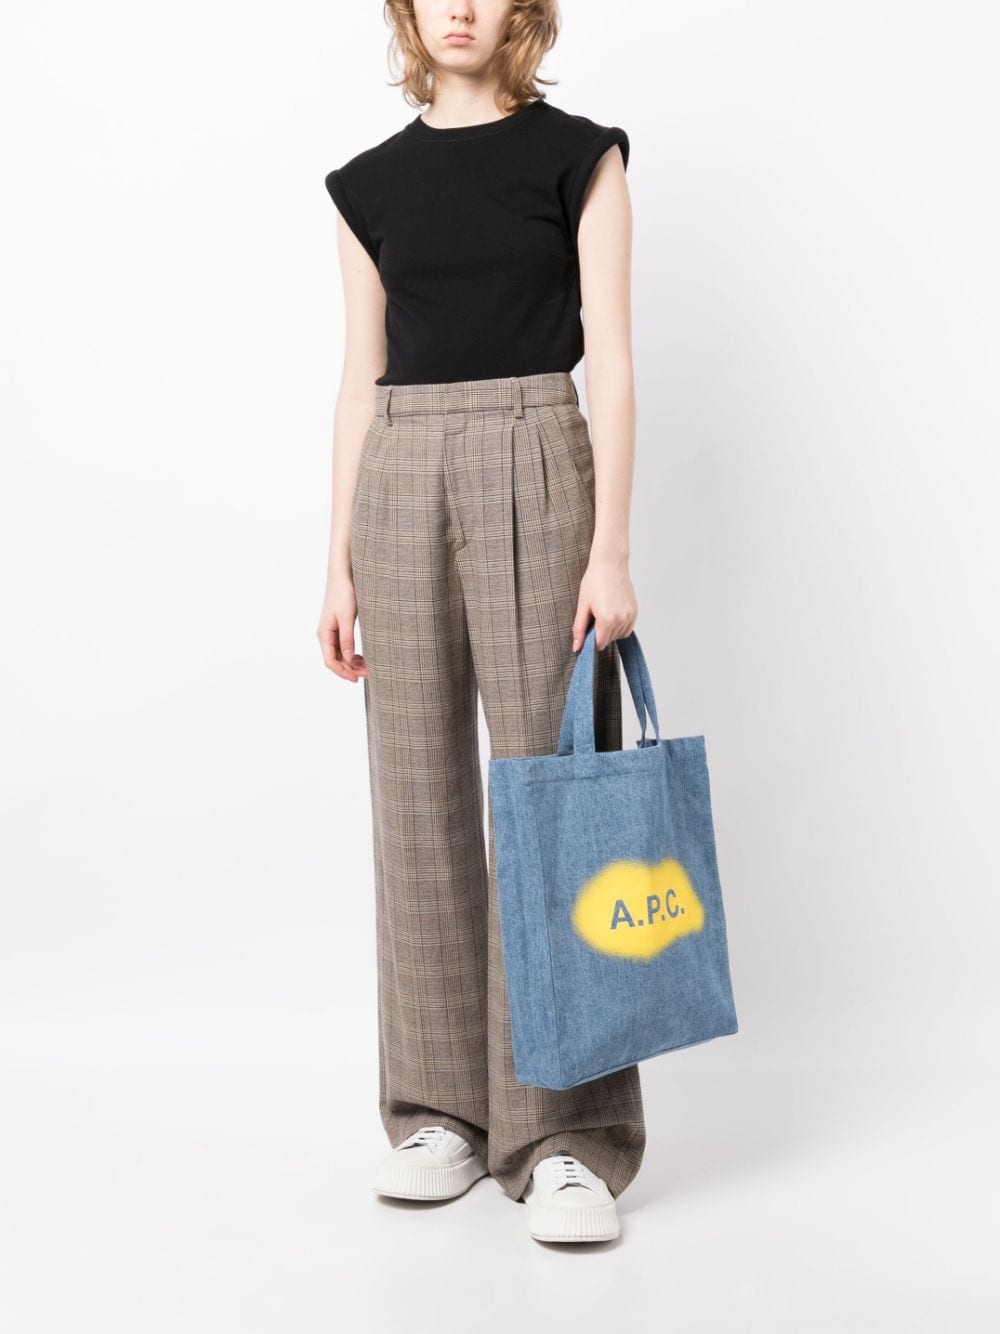 A.P.C. Tote Bags - Lampoo